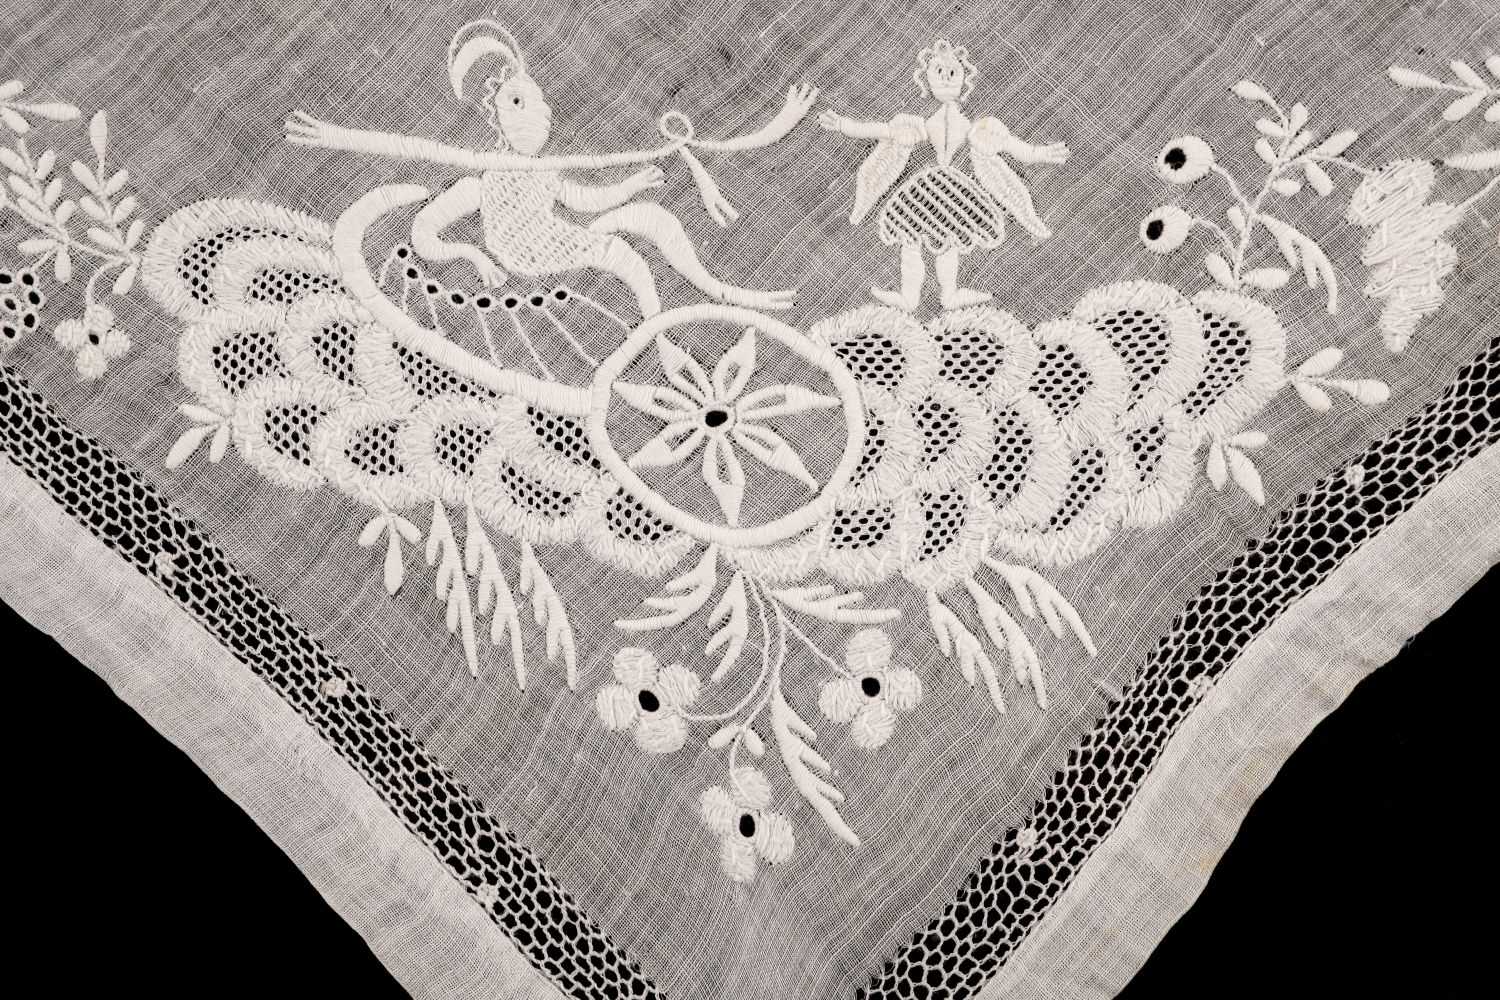 Lot 168 - Handkerchiefs. A collection of handkerchiefs, 19th and early 20th century